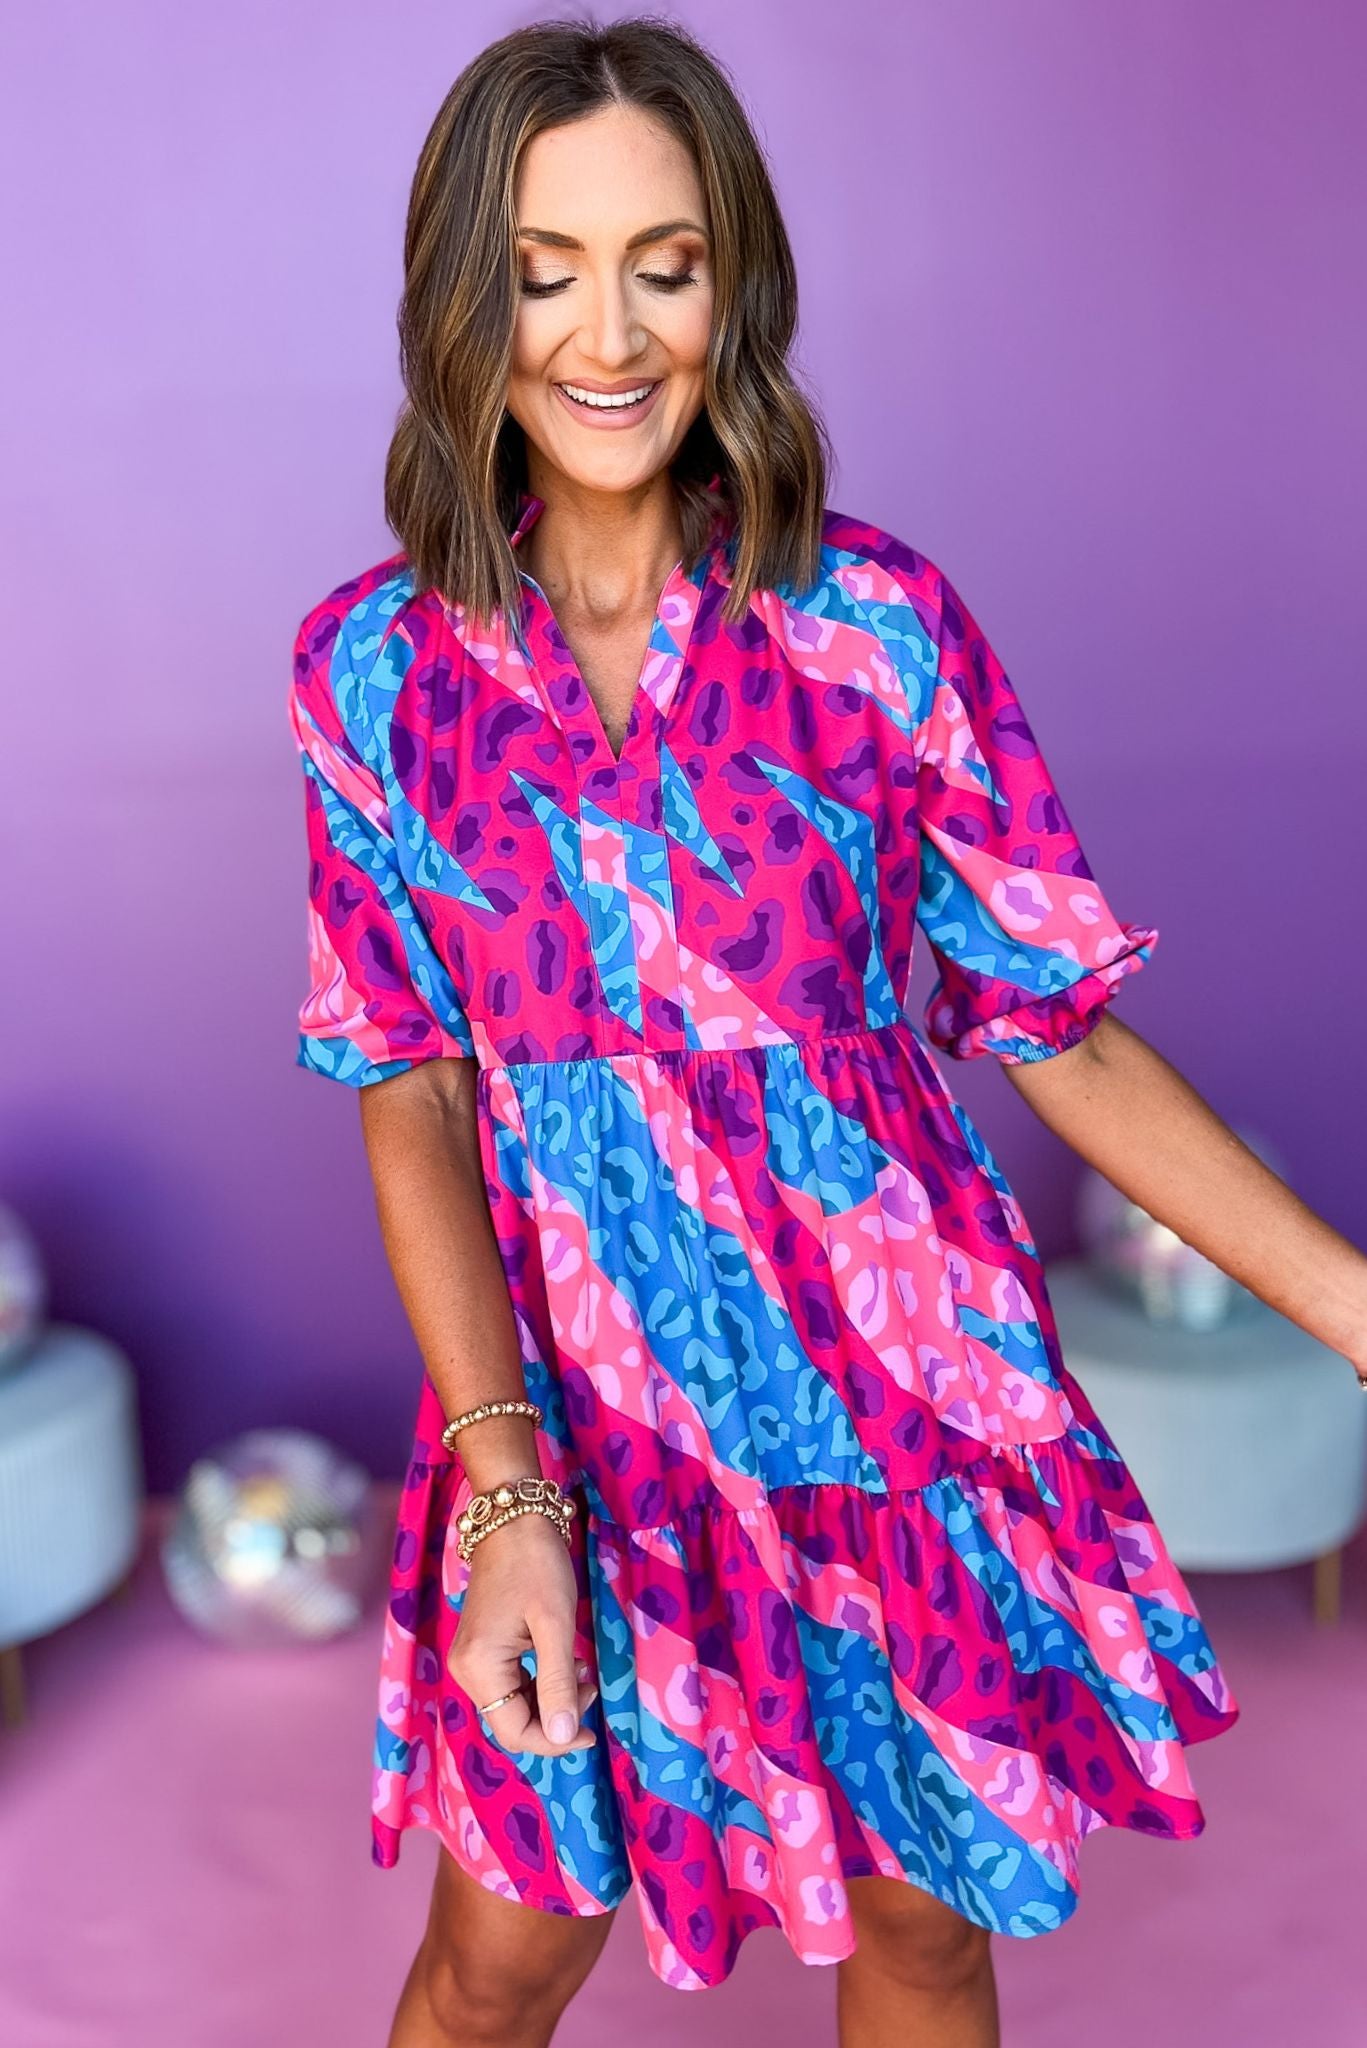 SSYS The Mix Print Tatum Dress In Camo Animal, ssys the label, ssys dress, printed dress, elevated dress, church dress, work dress, brunch dress, mix print dress, mom style, bright style, spring style, shop style your senses by Mallory Fitzsimmons, ssys by Mallory Fitzsimmons  Edit alt text